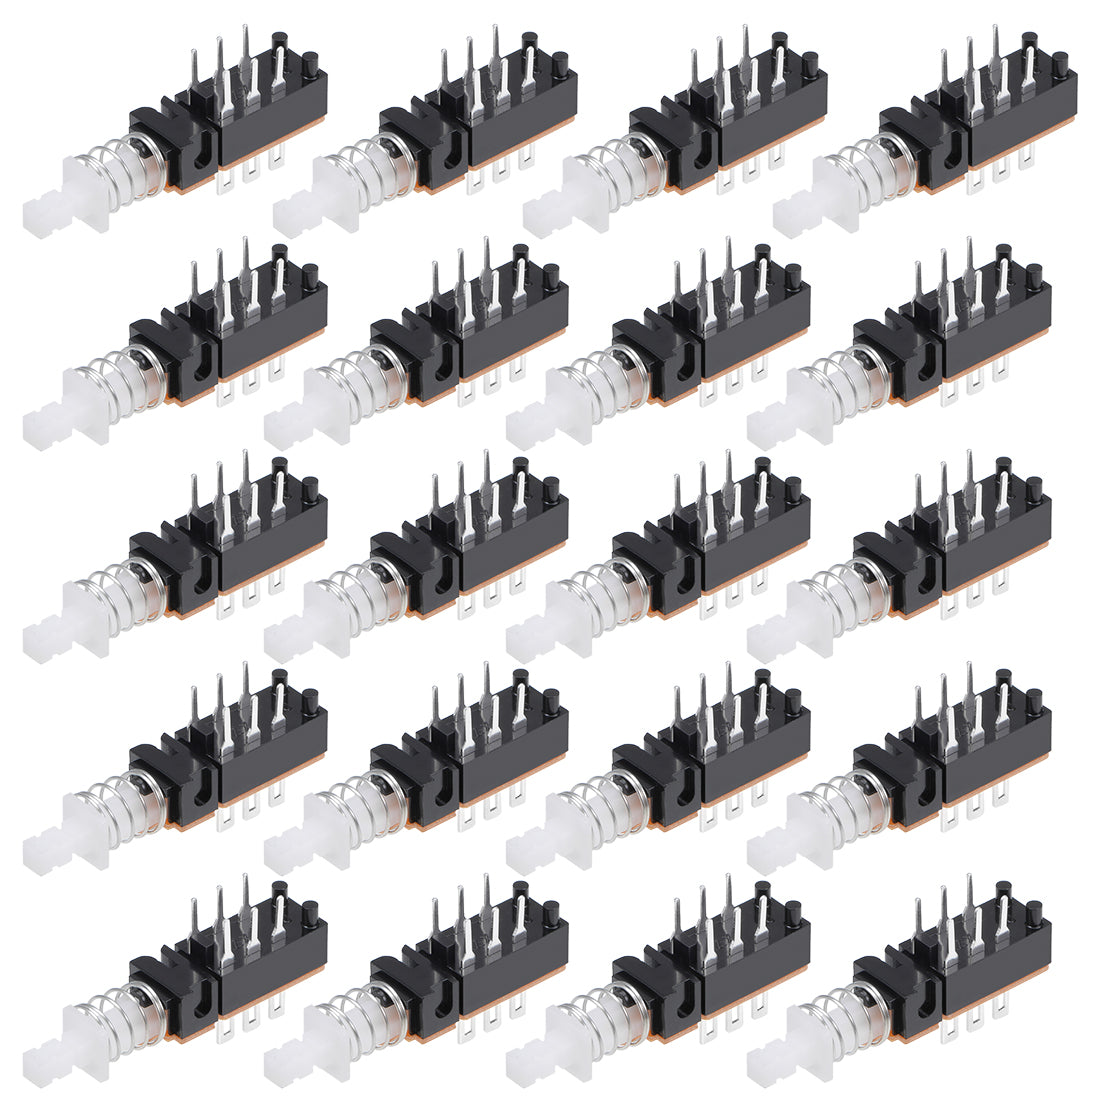 uxcell Uxcell Push Button Switch DPDT 6 Pin 1 Position Self-Locking Black 20pcs